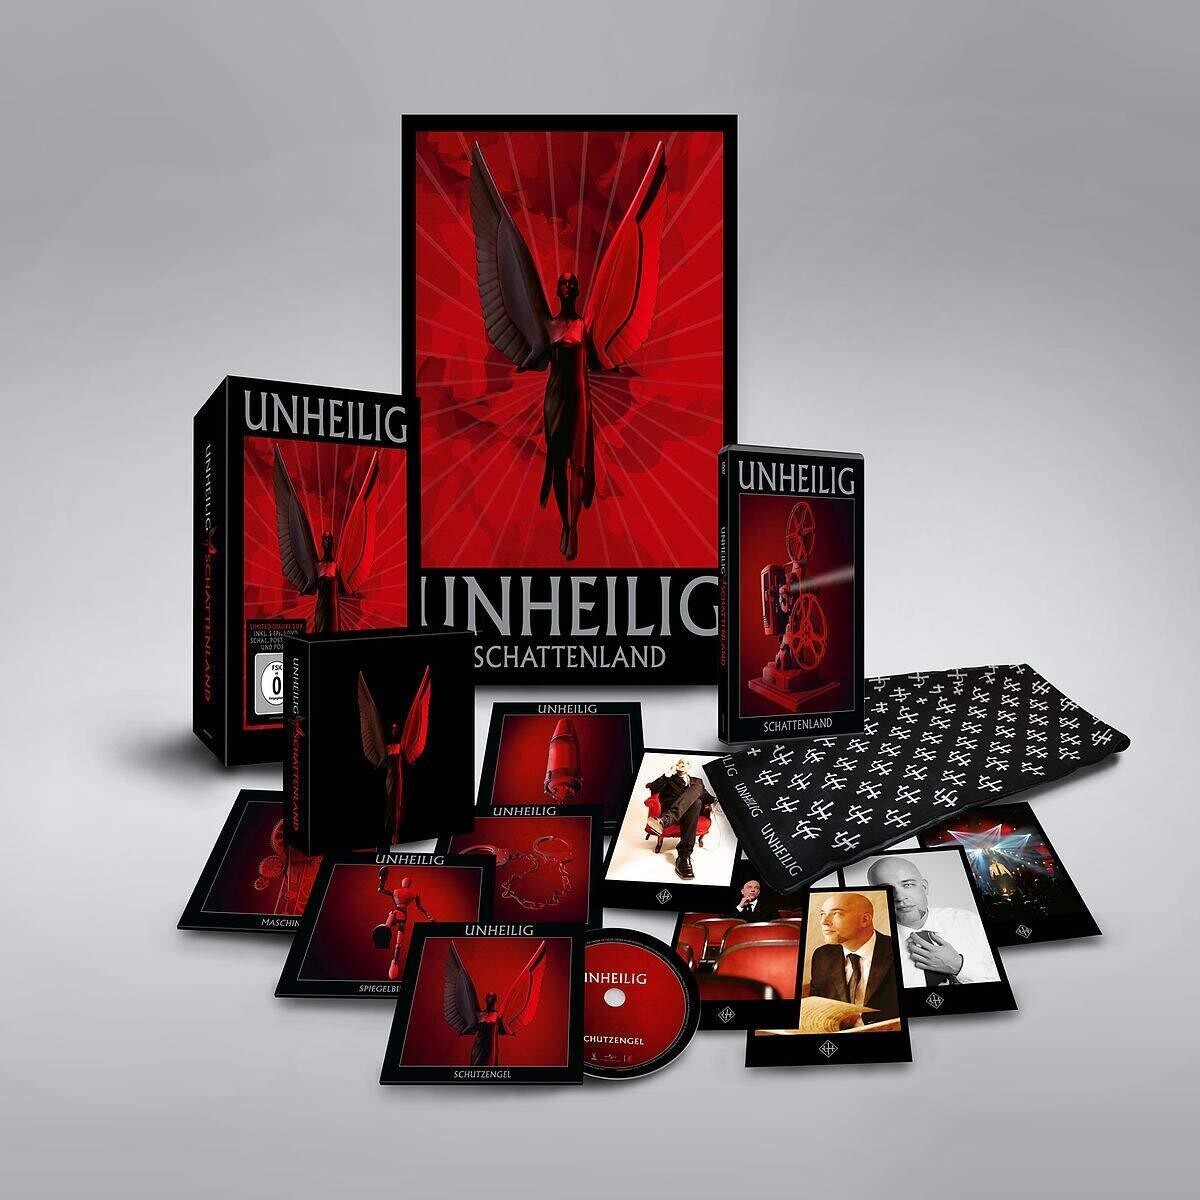 Unheilig - Schattenland (Limited Deluxe Box)(2020) CD&DVD